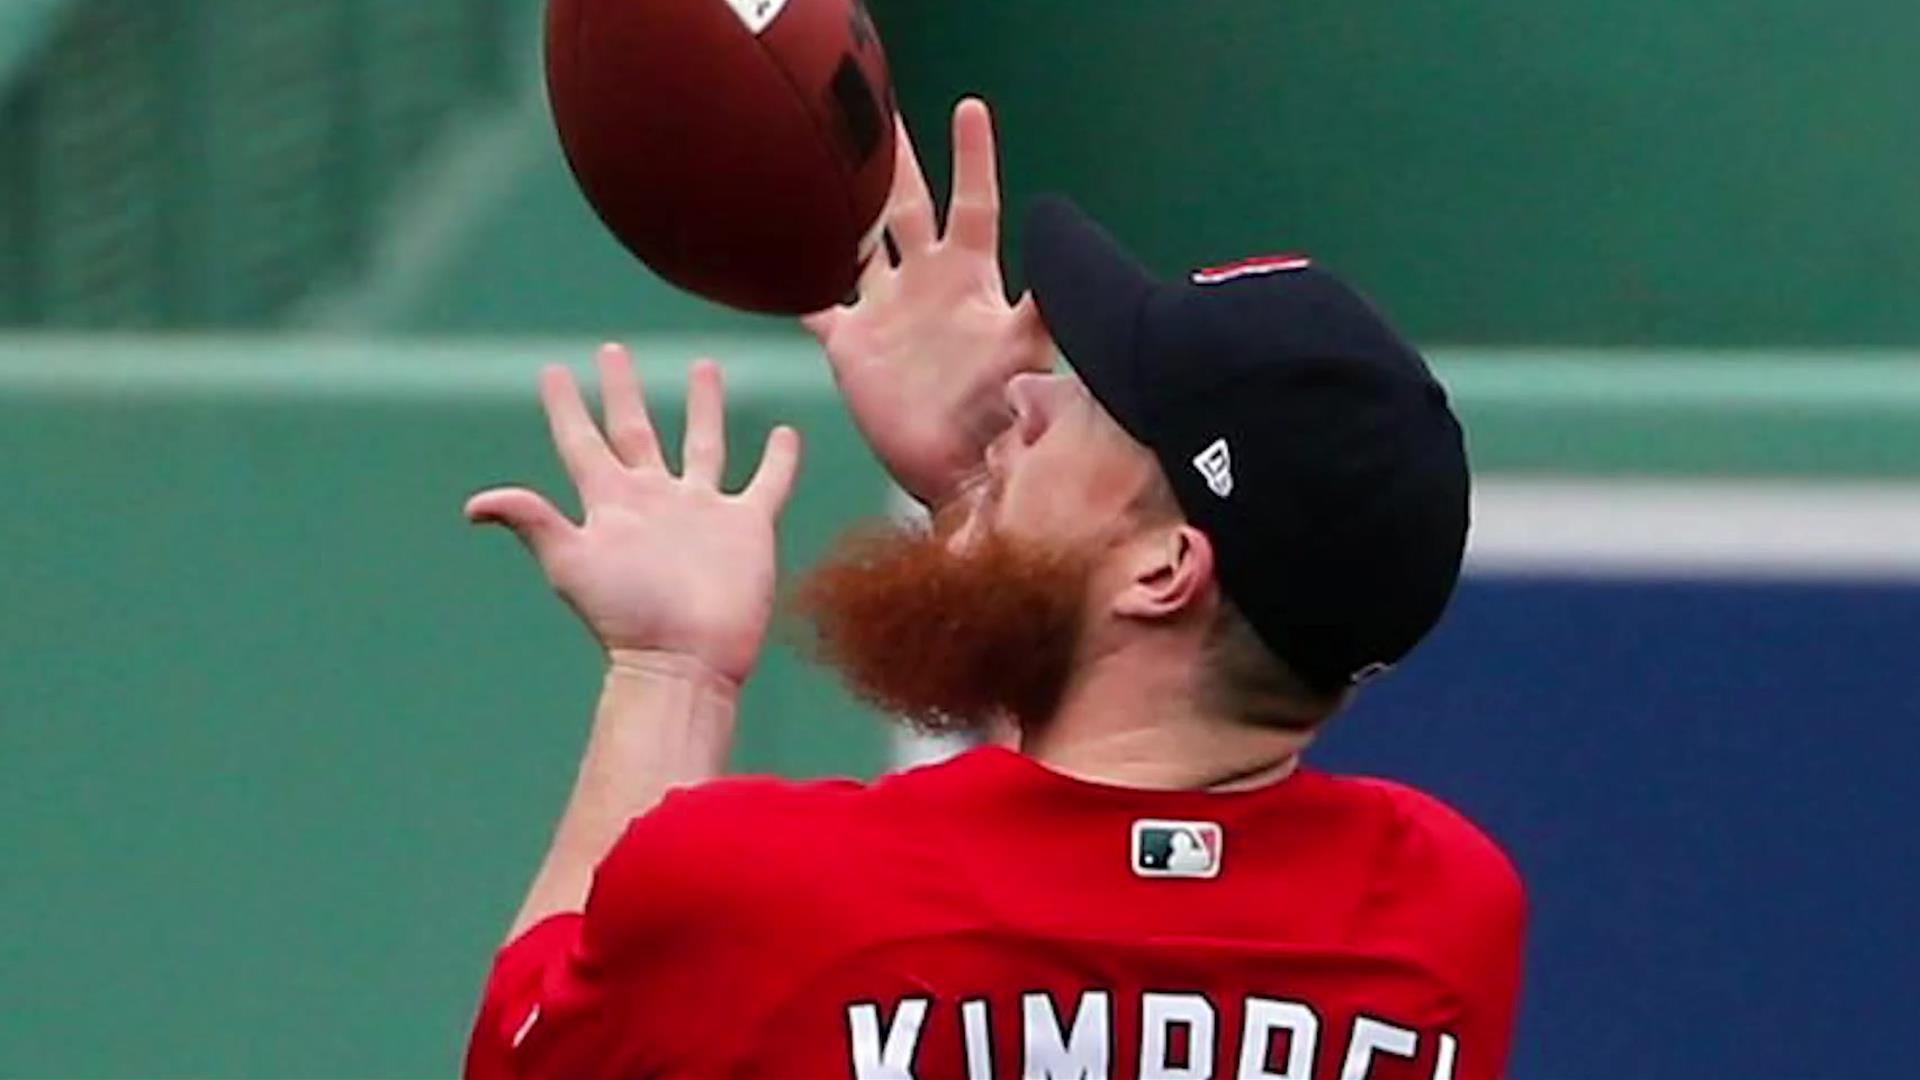 Cubs: Kimbrel hopes to change the narrative after 2019 ending SUN